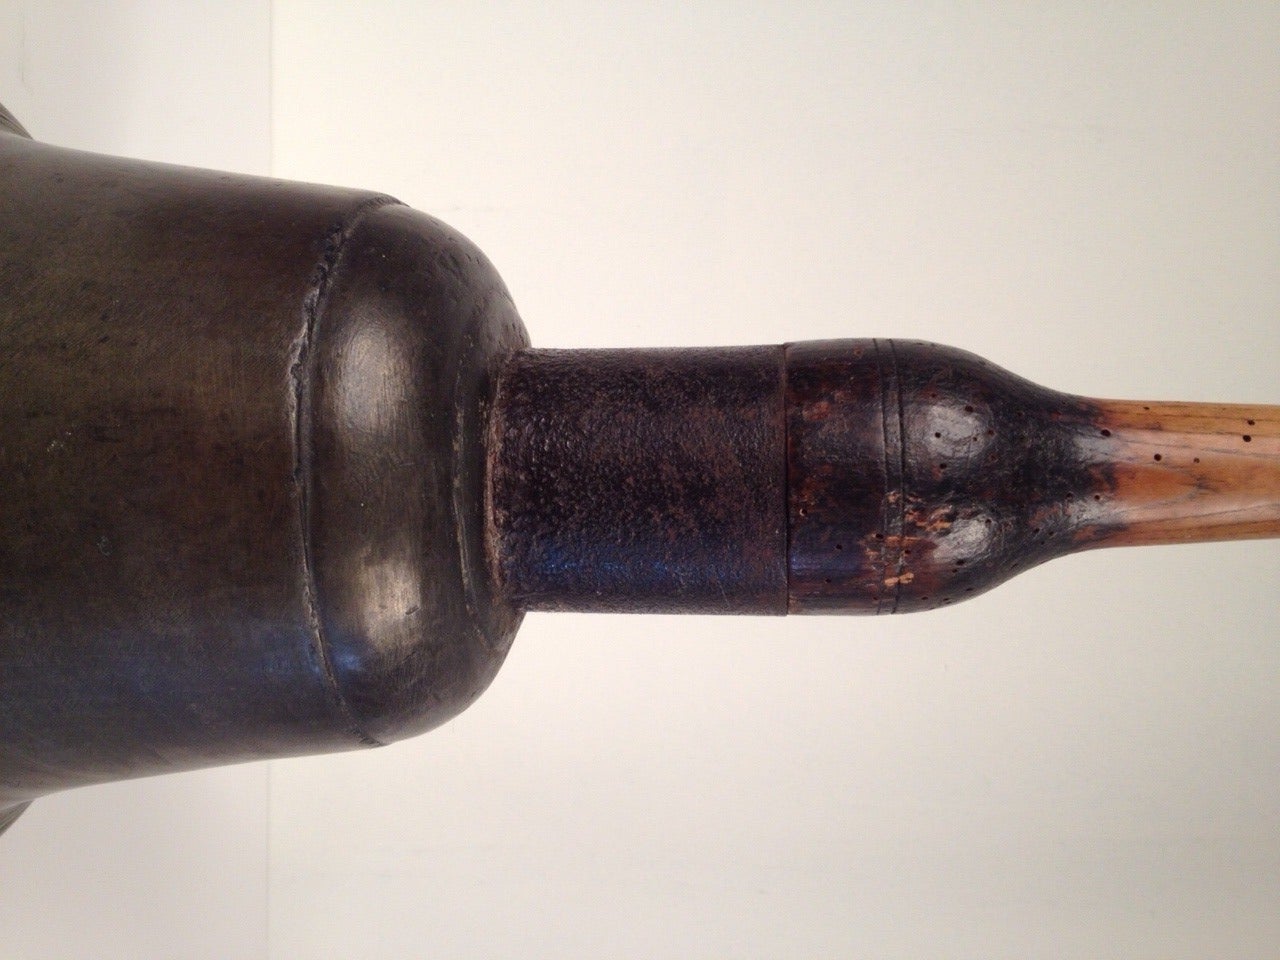 Rare bronze bell with wooden handle. From Louisiana plantation, mid-19th century.